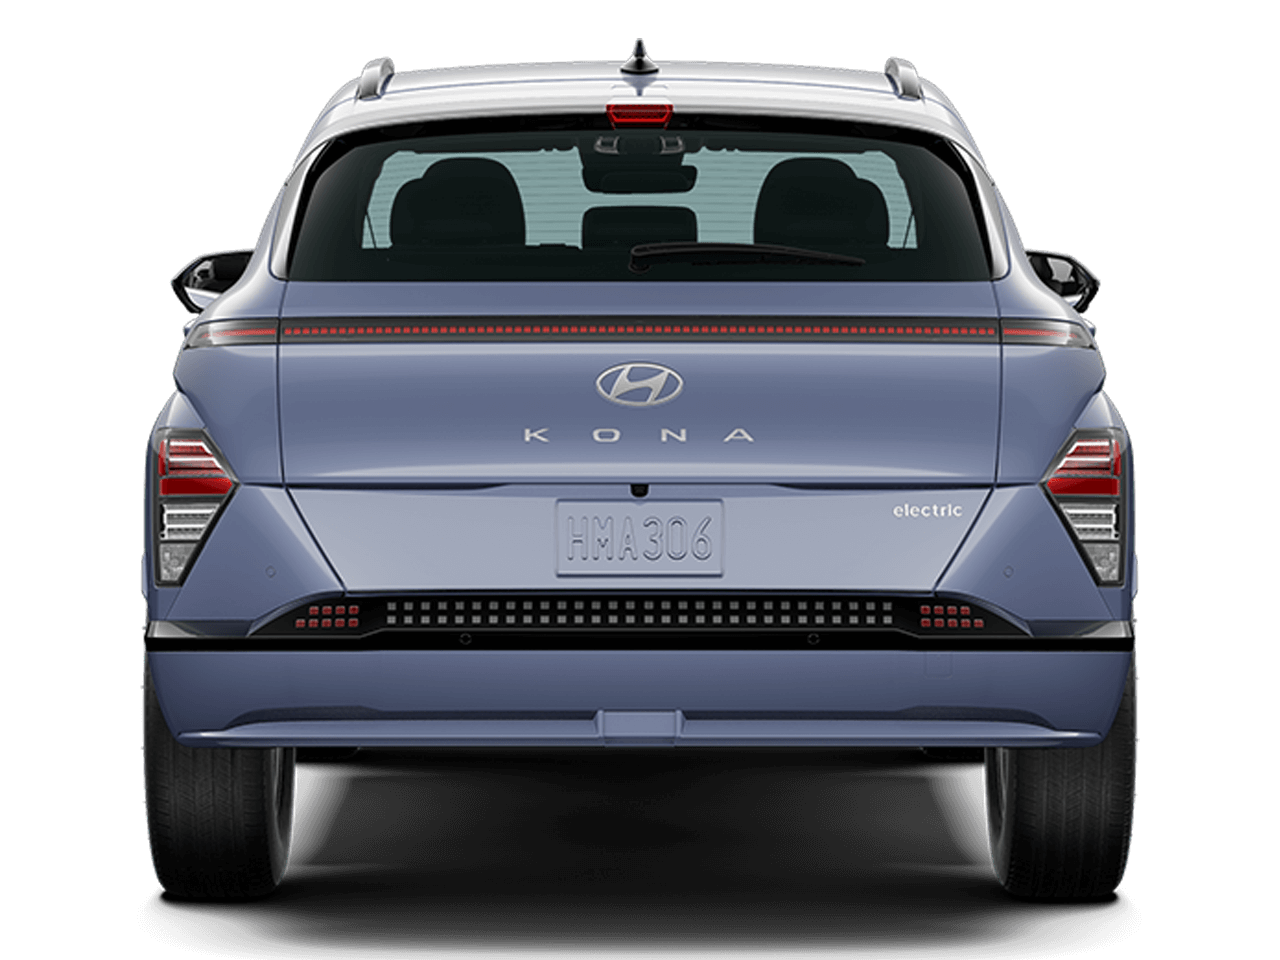 2023 Hyundai Kona Electric Incentives, Specials & Offers in Troy MI